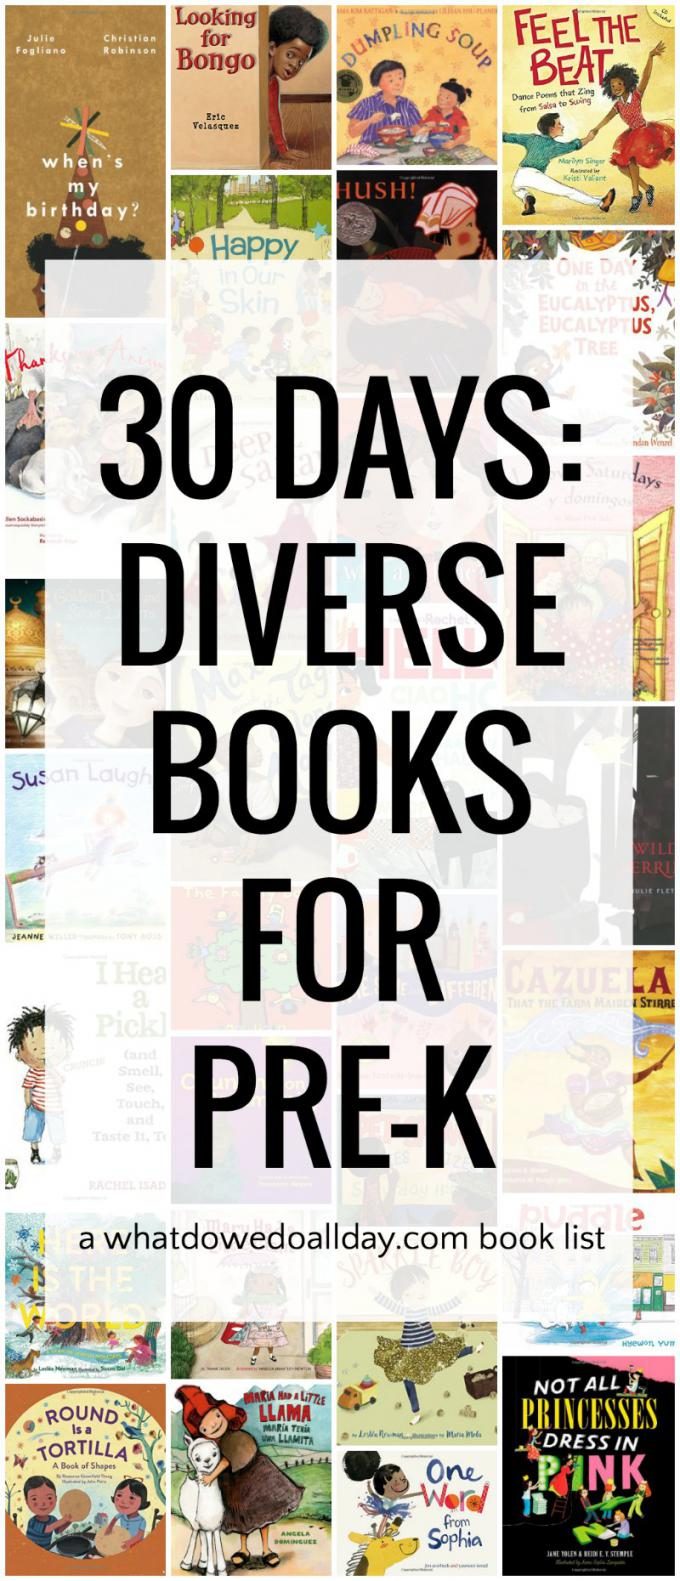 One month of reading diverse books for preschoolers.